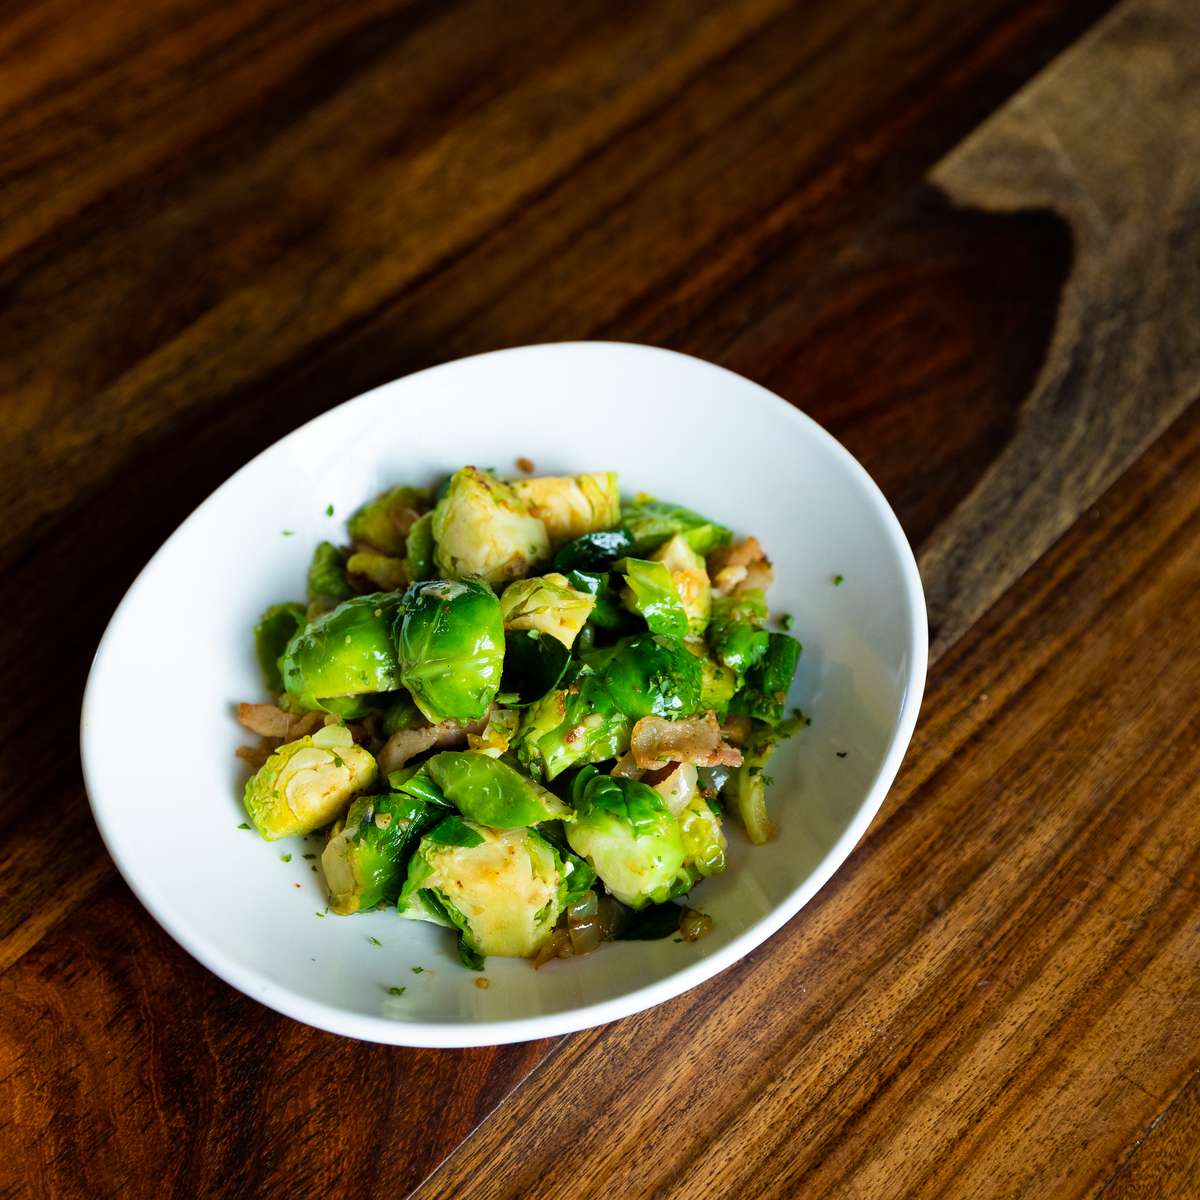 Bacon Brussels Sprouts